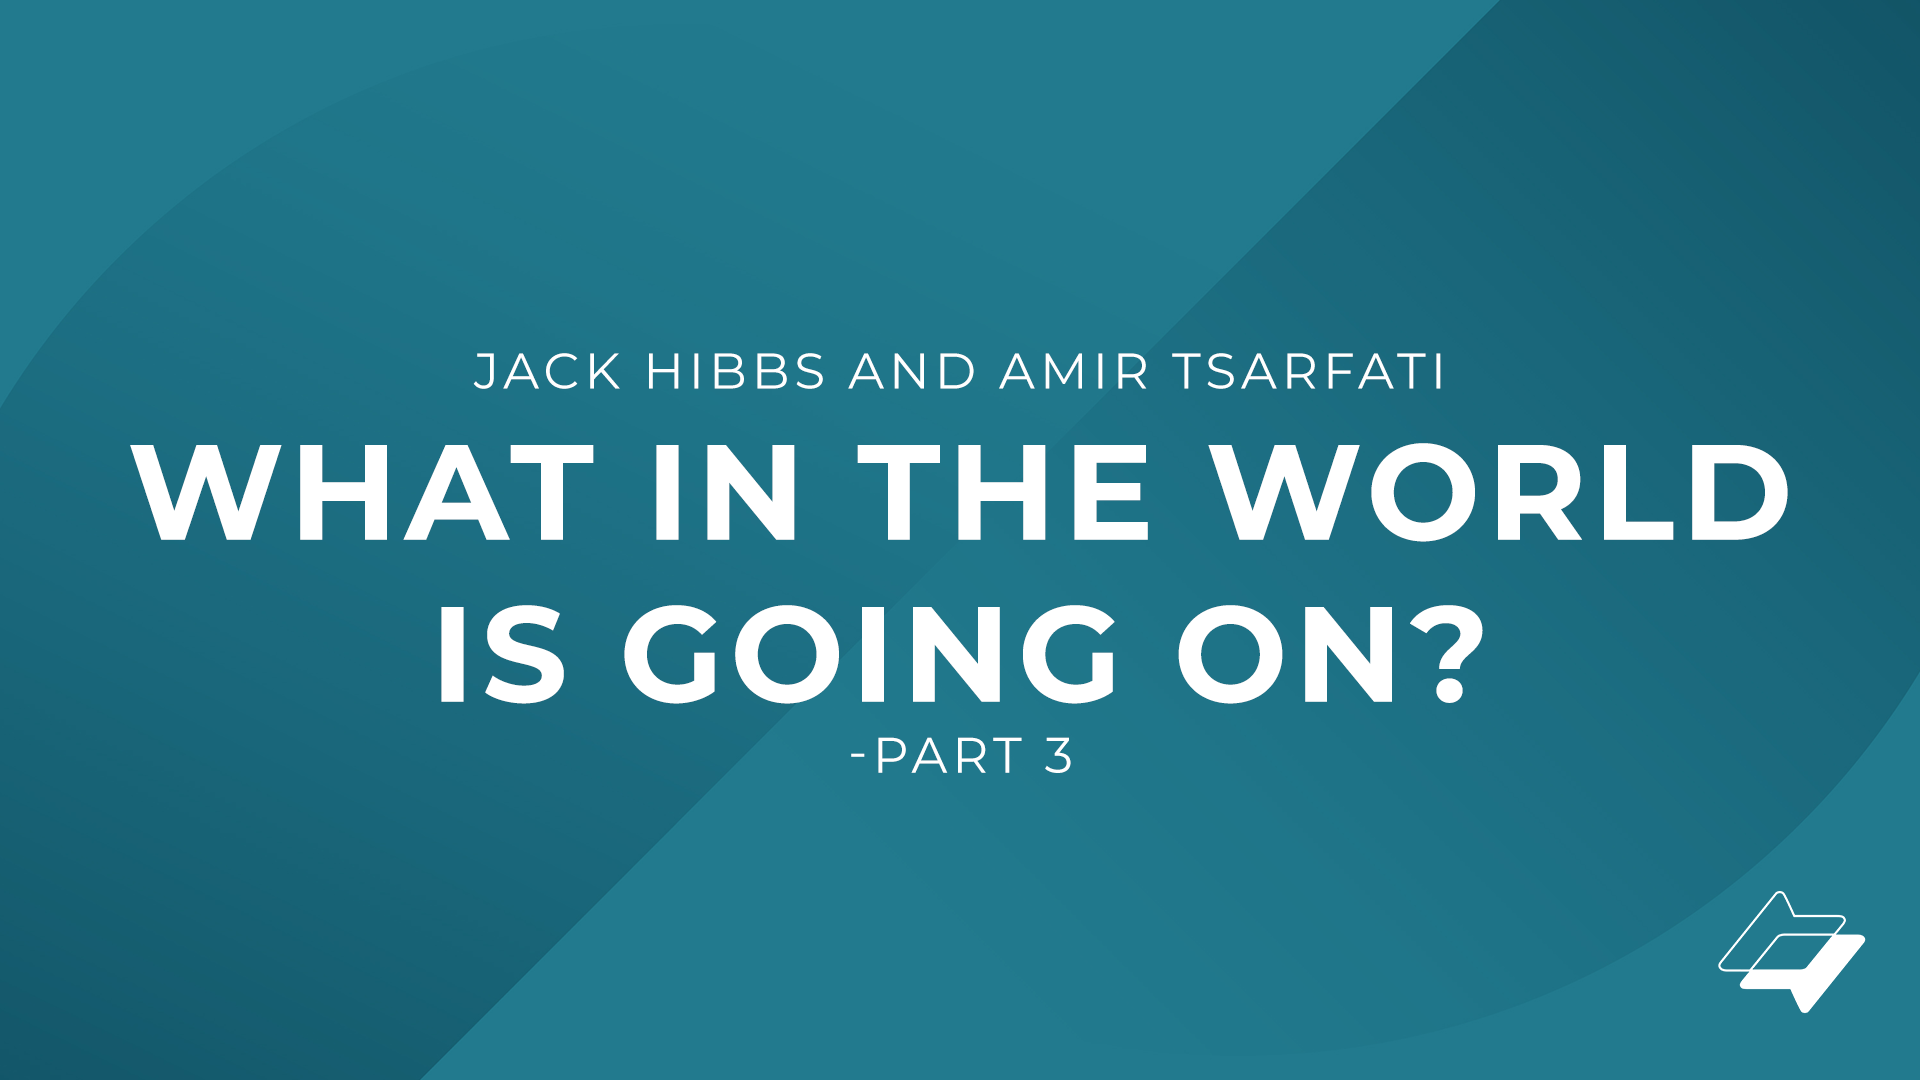 Jack Hibbs and Amir Tsarfati – What in the World is Going On? – Part 3